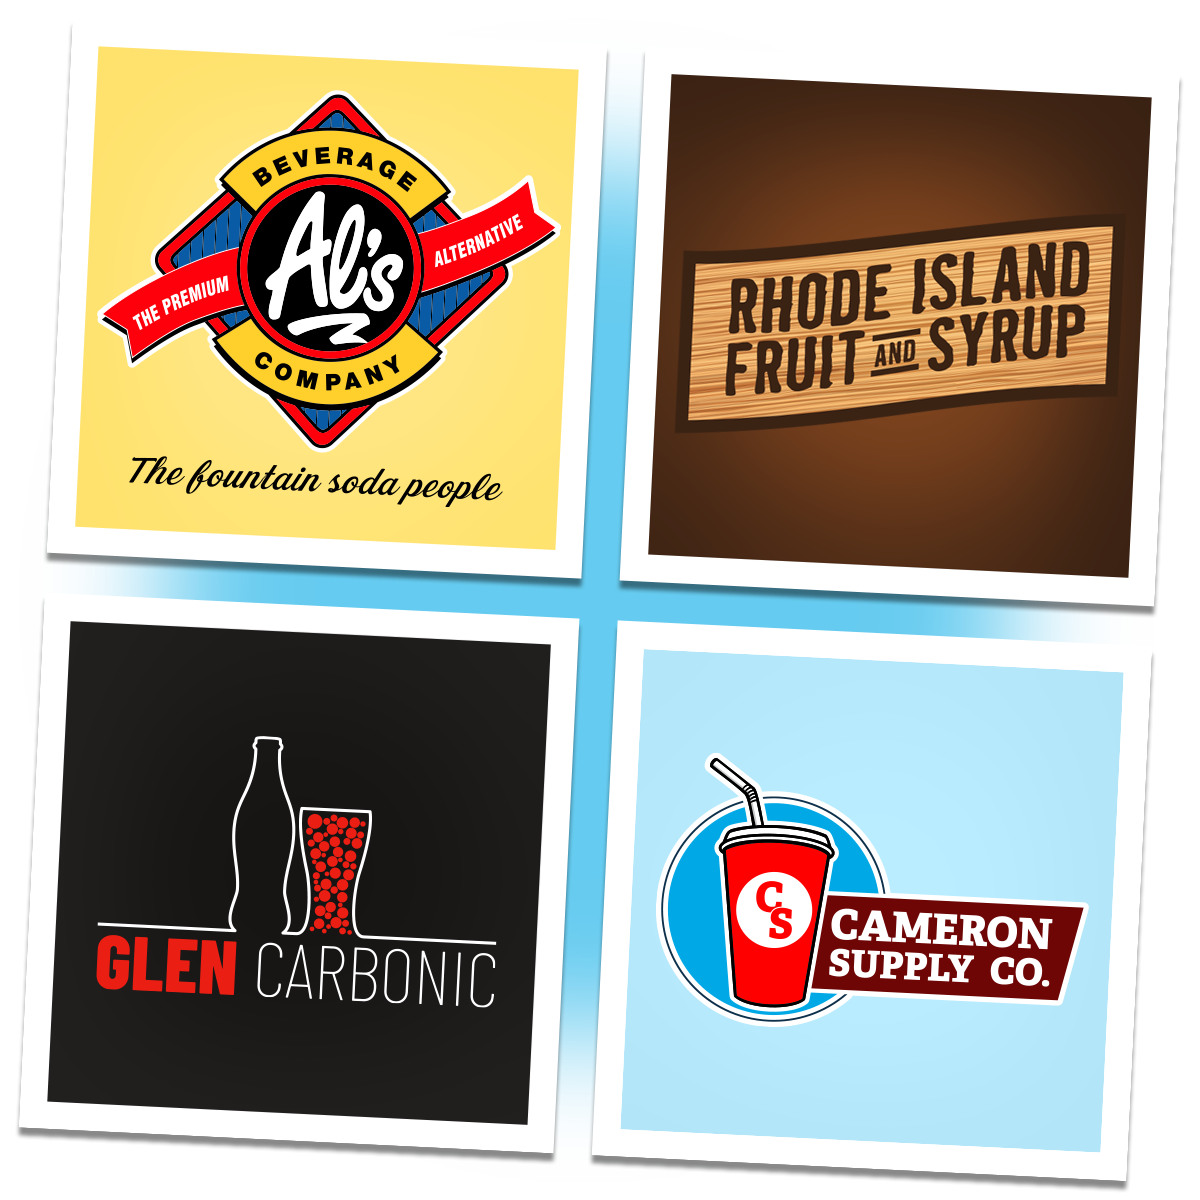 Formerly known as Al’s Beverage Company, Rhode Island Fruit and Syrup, Cameron Supply, and Glen Carbonic.